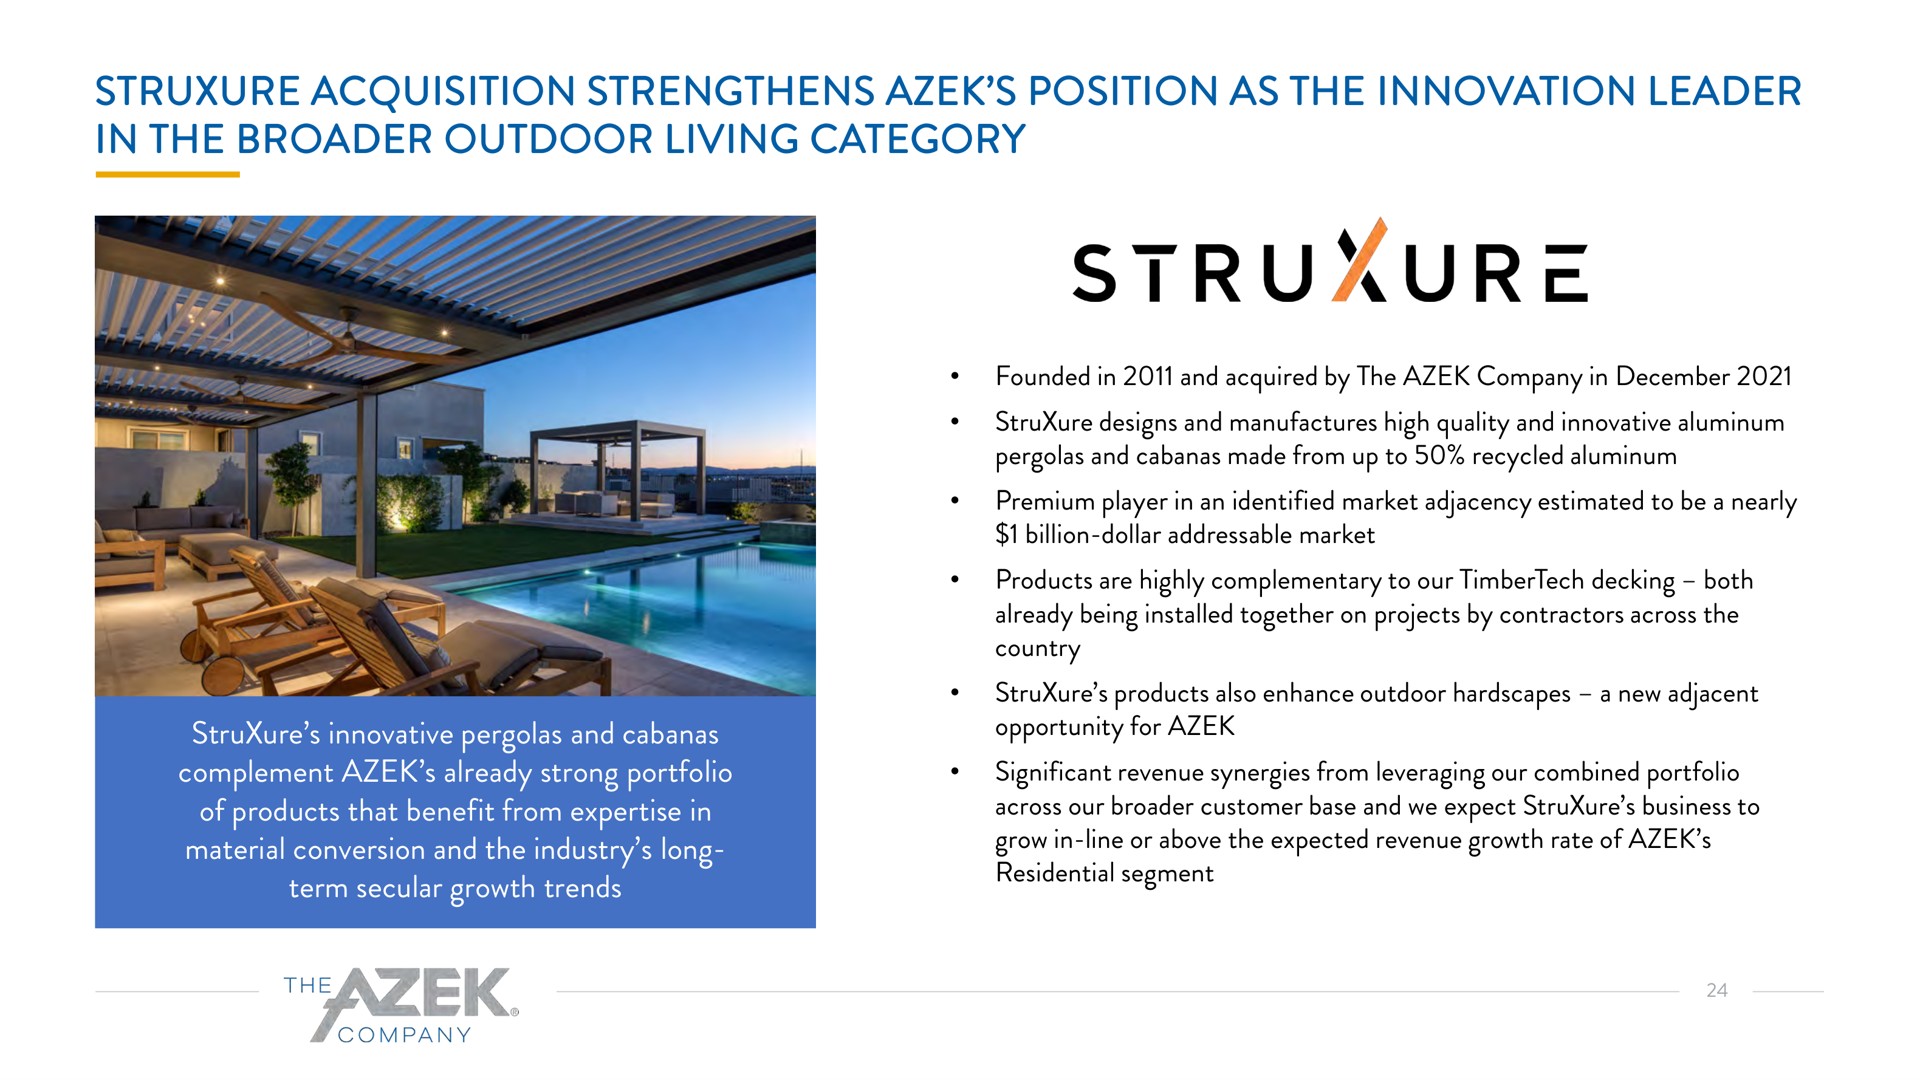 acquisition strengthens position as the innovation leader in the outdoor living category innovative pergolas and cabanas complement already strong portfolio of products that benefit from in material conversion and the industry long term secular growth trends | Azek